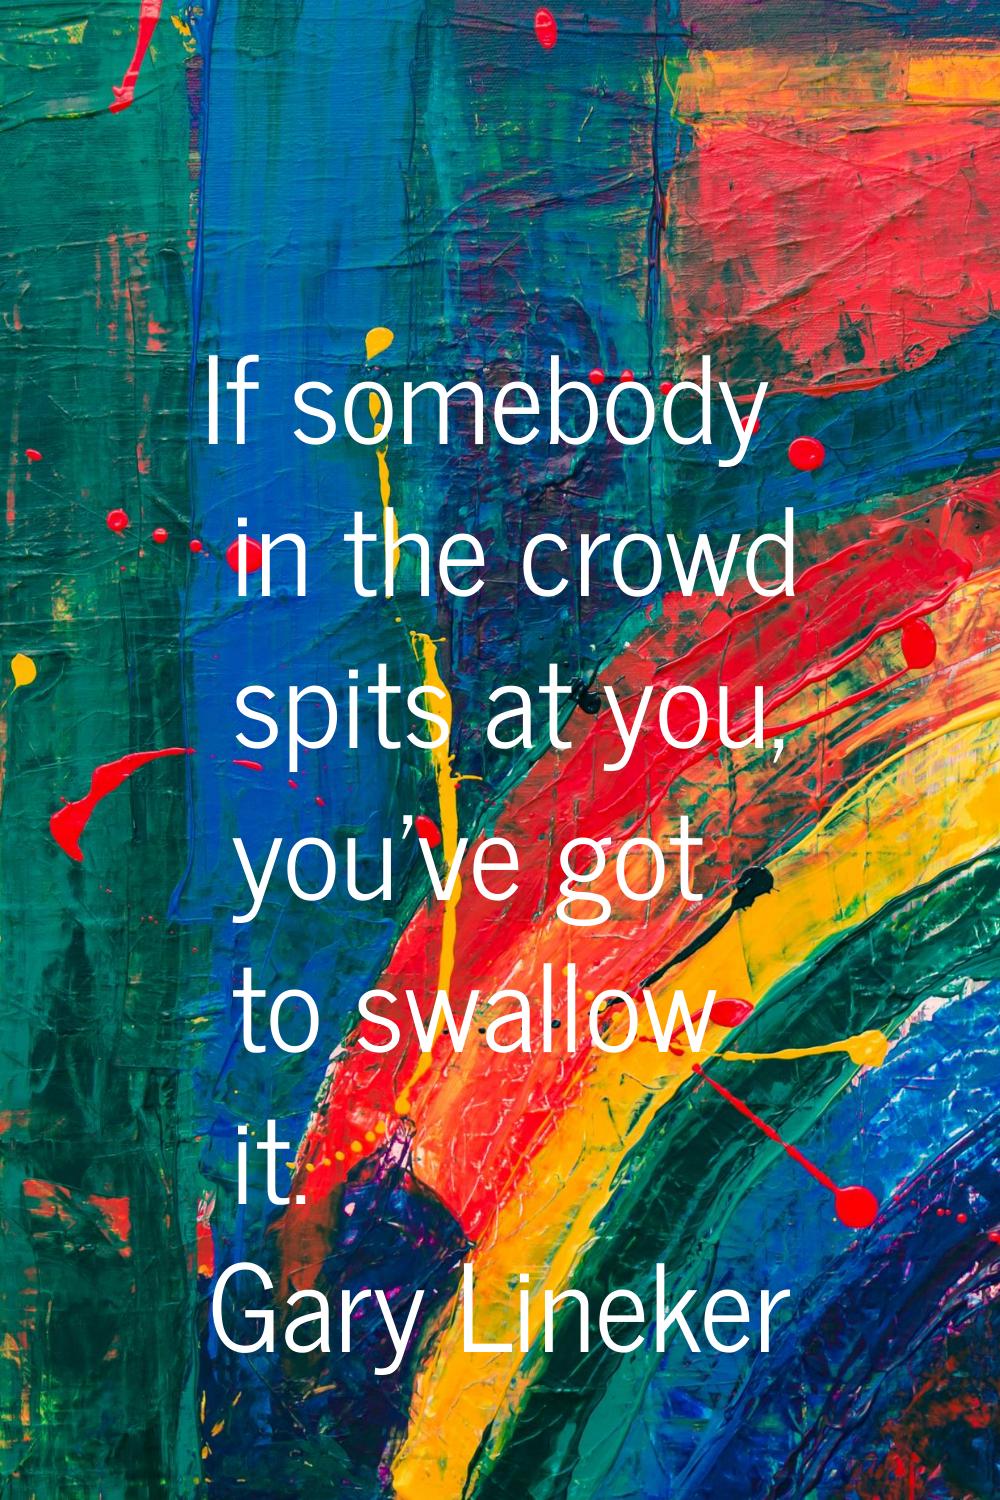 If somebody in the crowd spits at you, you've got to swallow it.